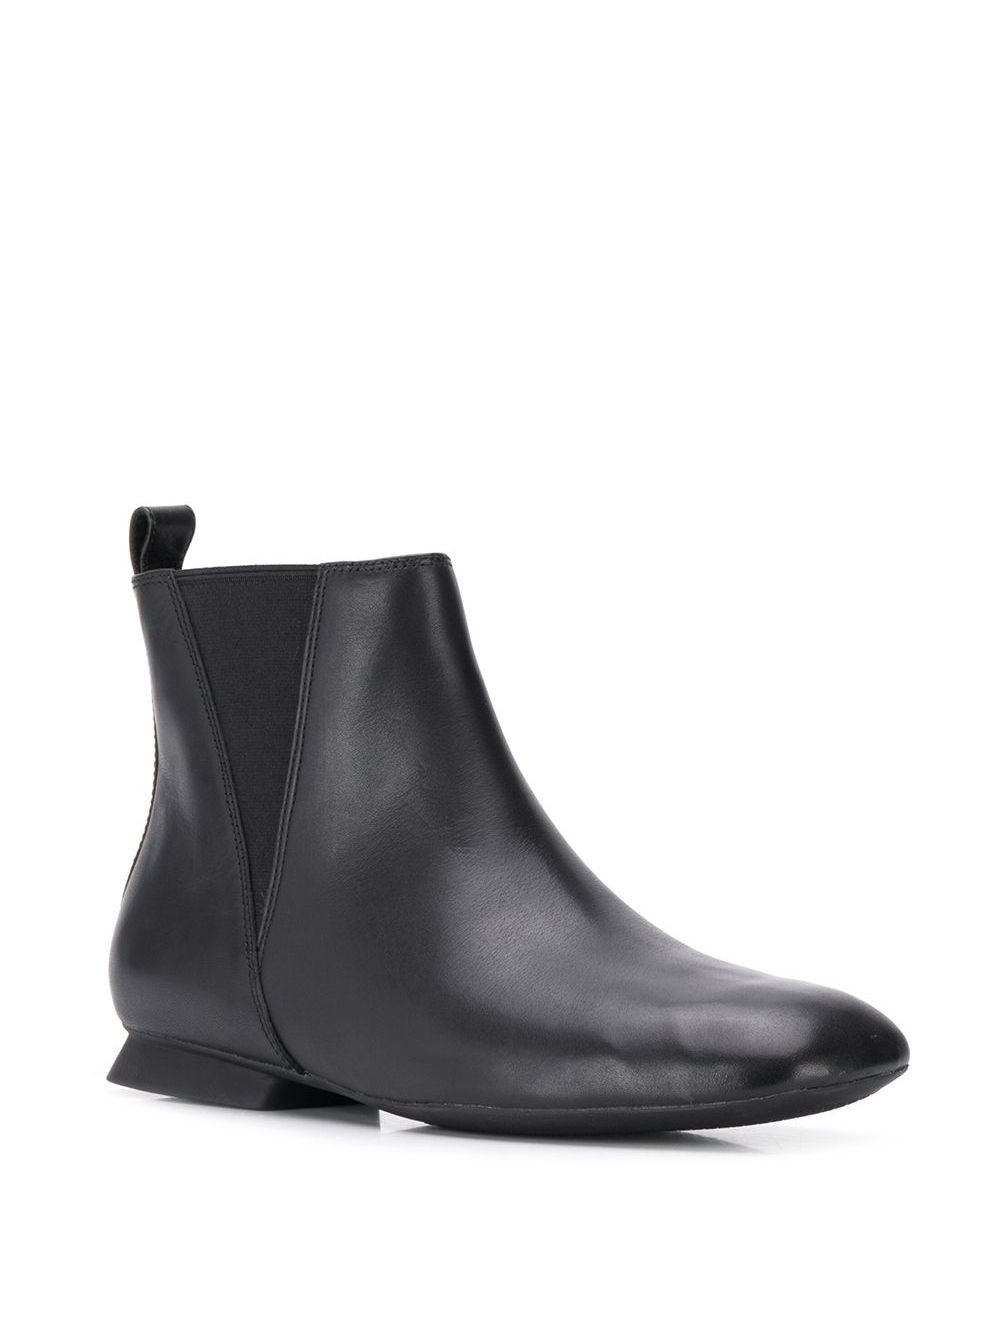 Shop Camper slip-on ankle boots with Express Delivery - FARFETCH